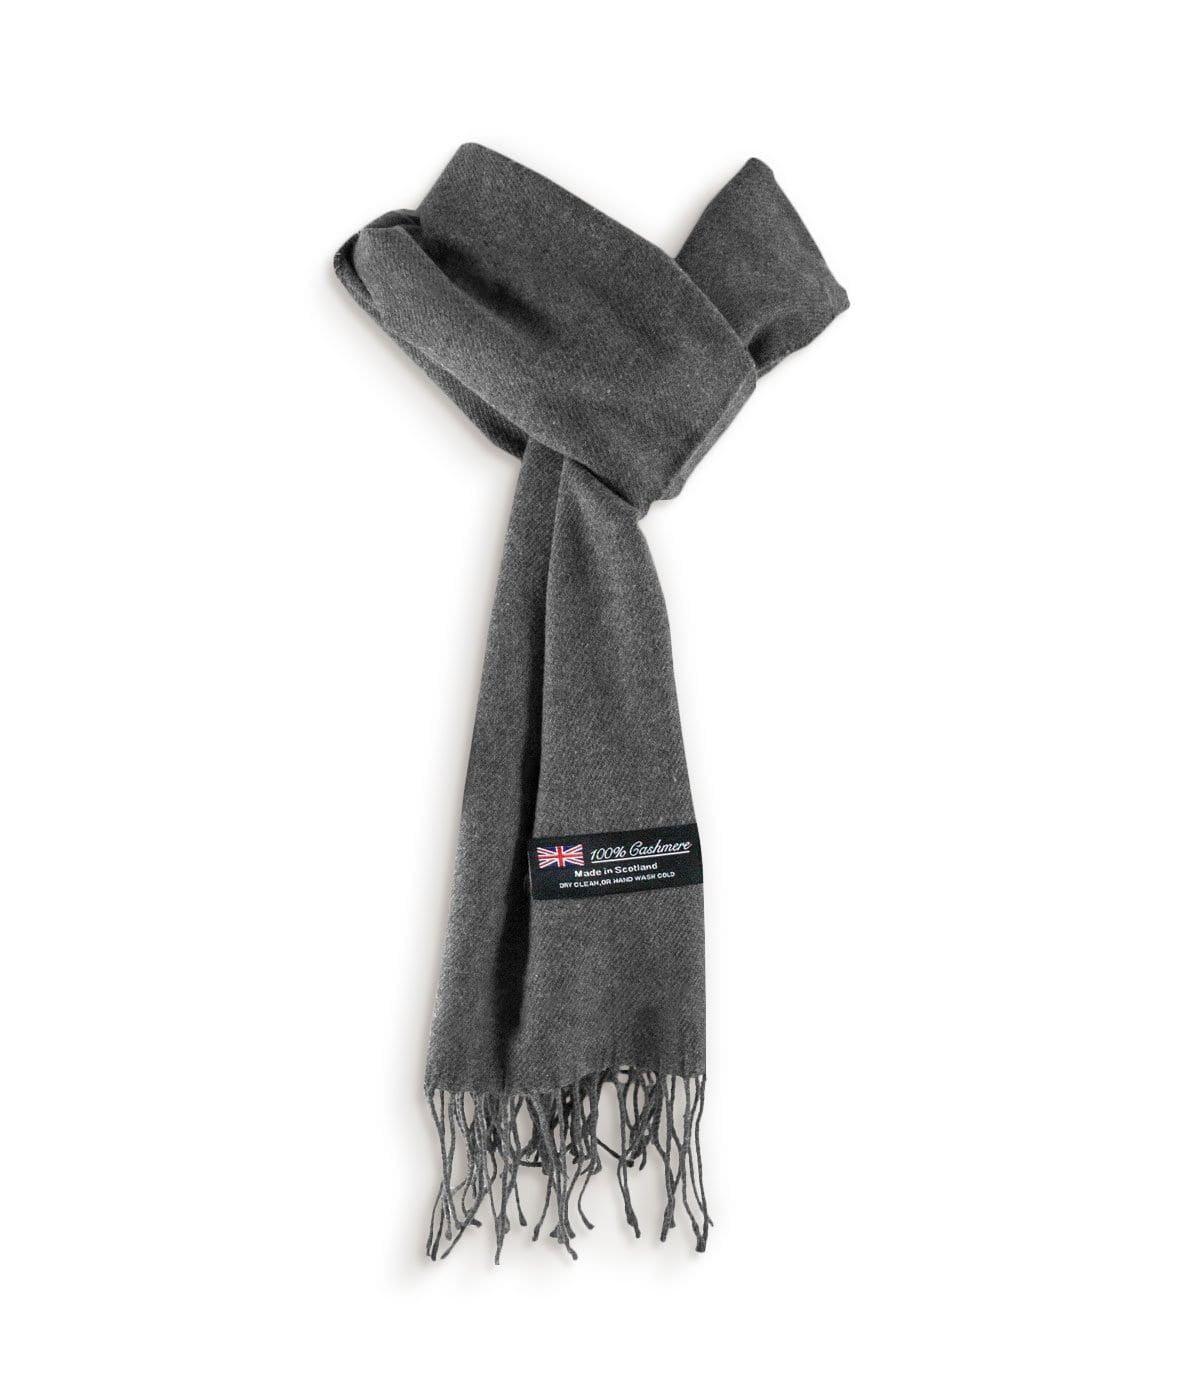 hand made in Scotland by Love Cashmere Charcoal Gray Women's 100% Cashmere Wrap Scarf